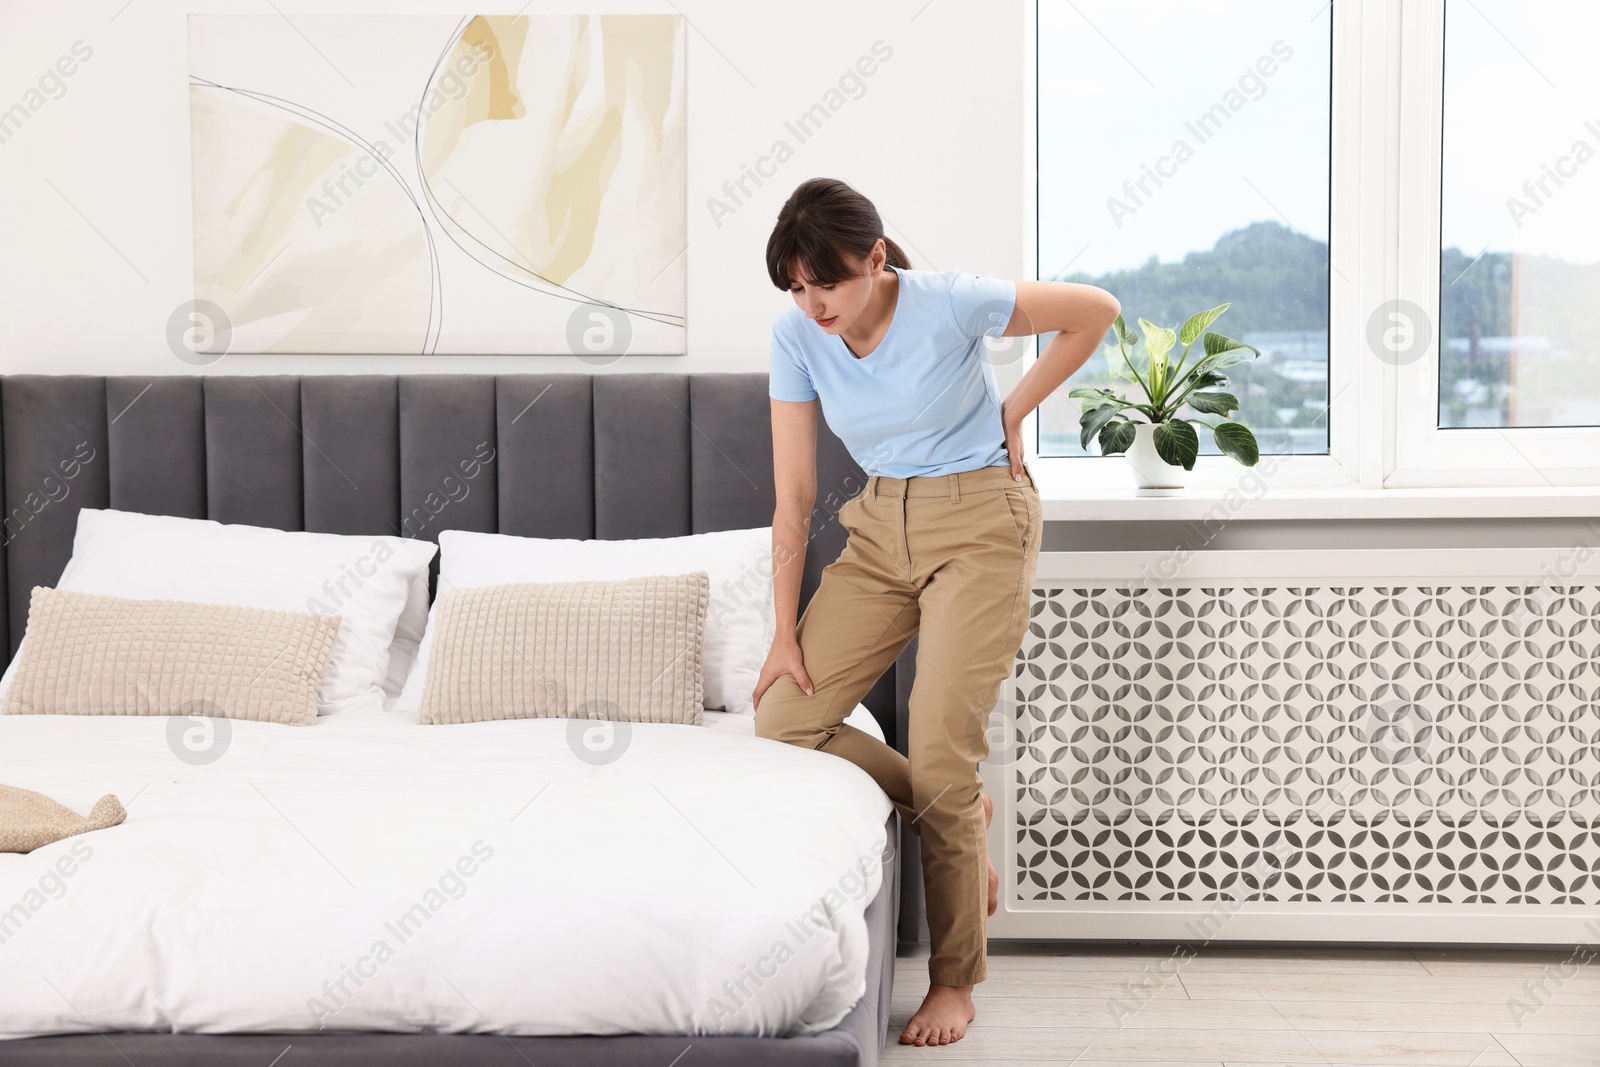 Photo of Upset woman suffering from back pain in bedroom